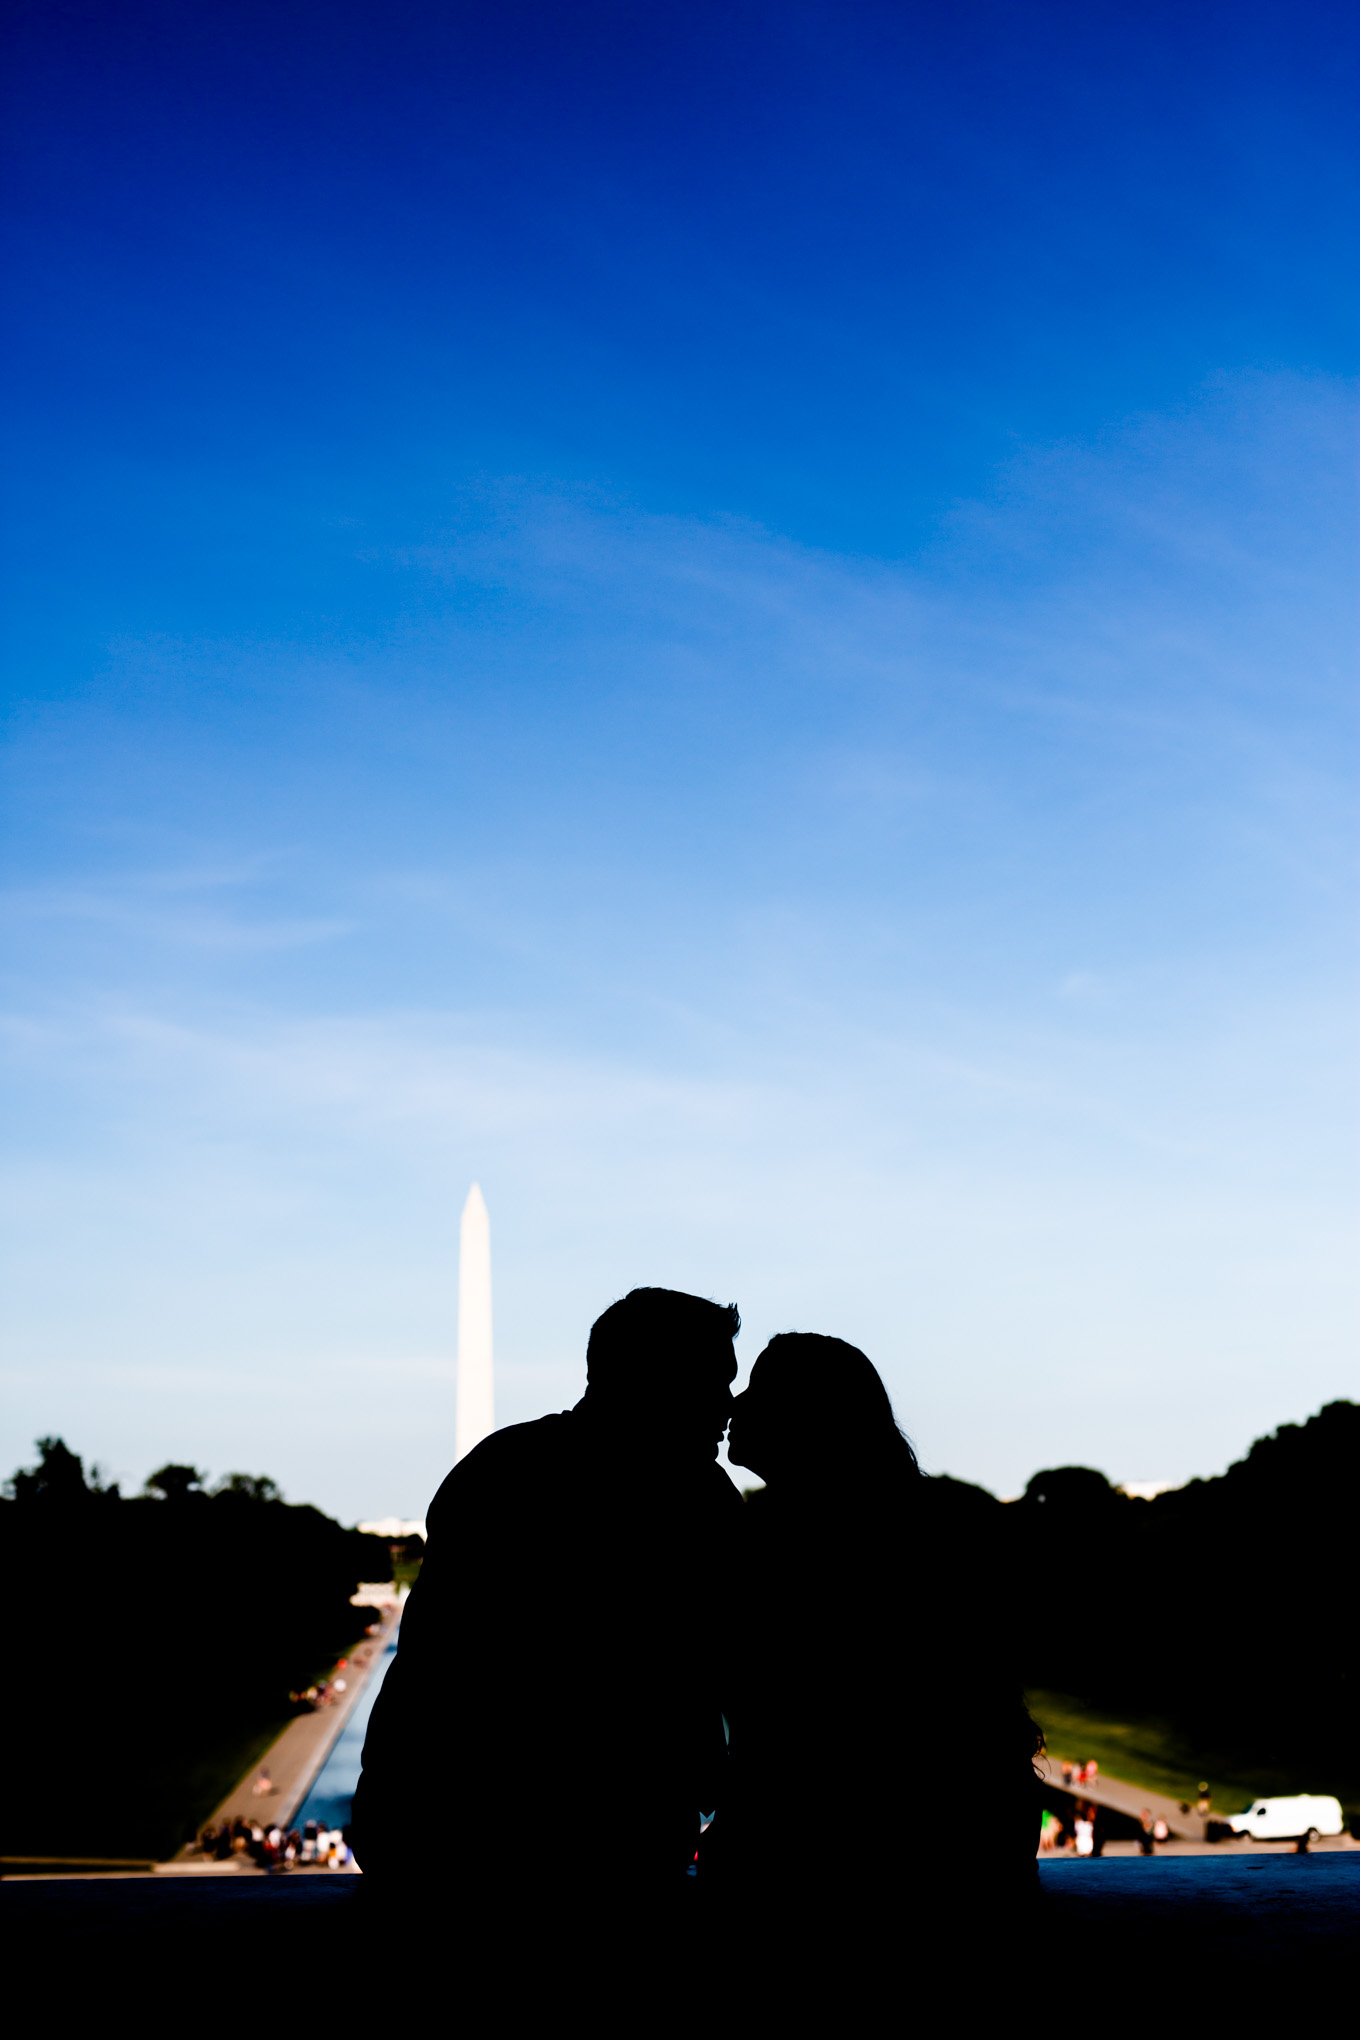 National Mall anniversary photos, National Mall portraits, National Mall photos, National Mall DC, DC portraits, anniversary portraits, anniversary photos, couple portraits, DC anniversary, Rachel E.H. Photography, married couple, wedding anniversary, Lincoln Memorial portraits, silhouette